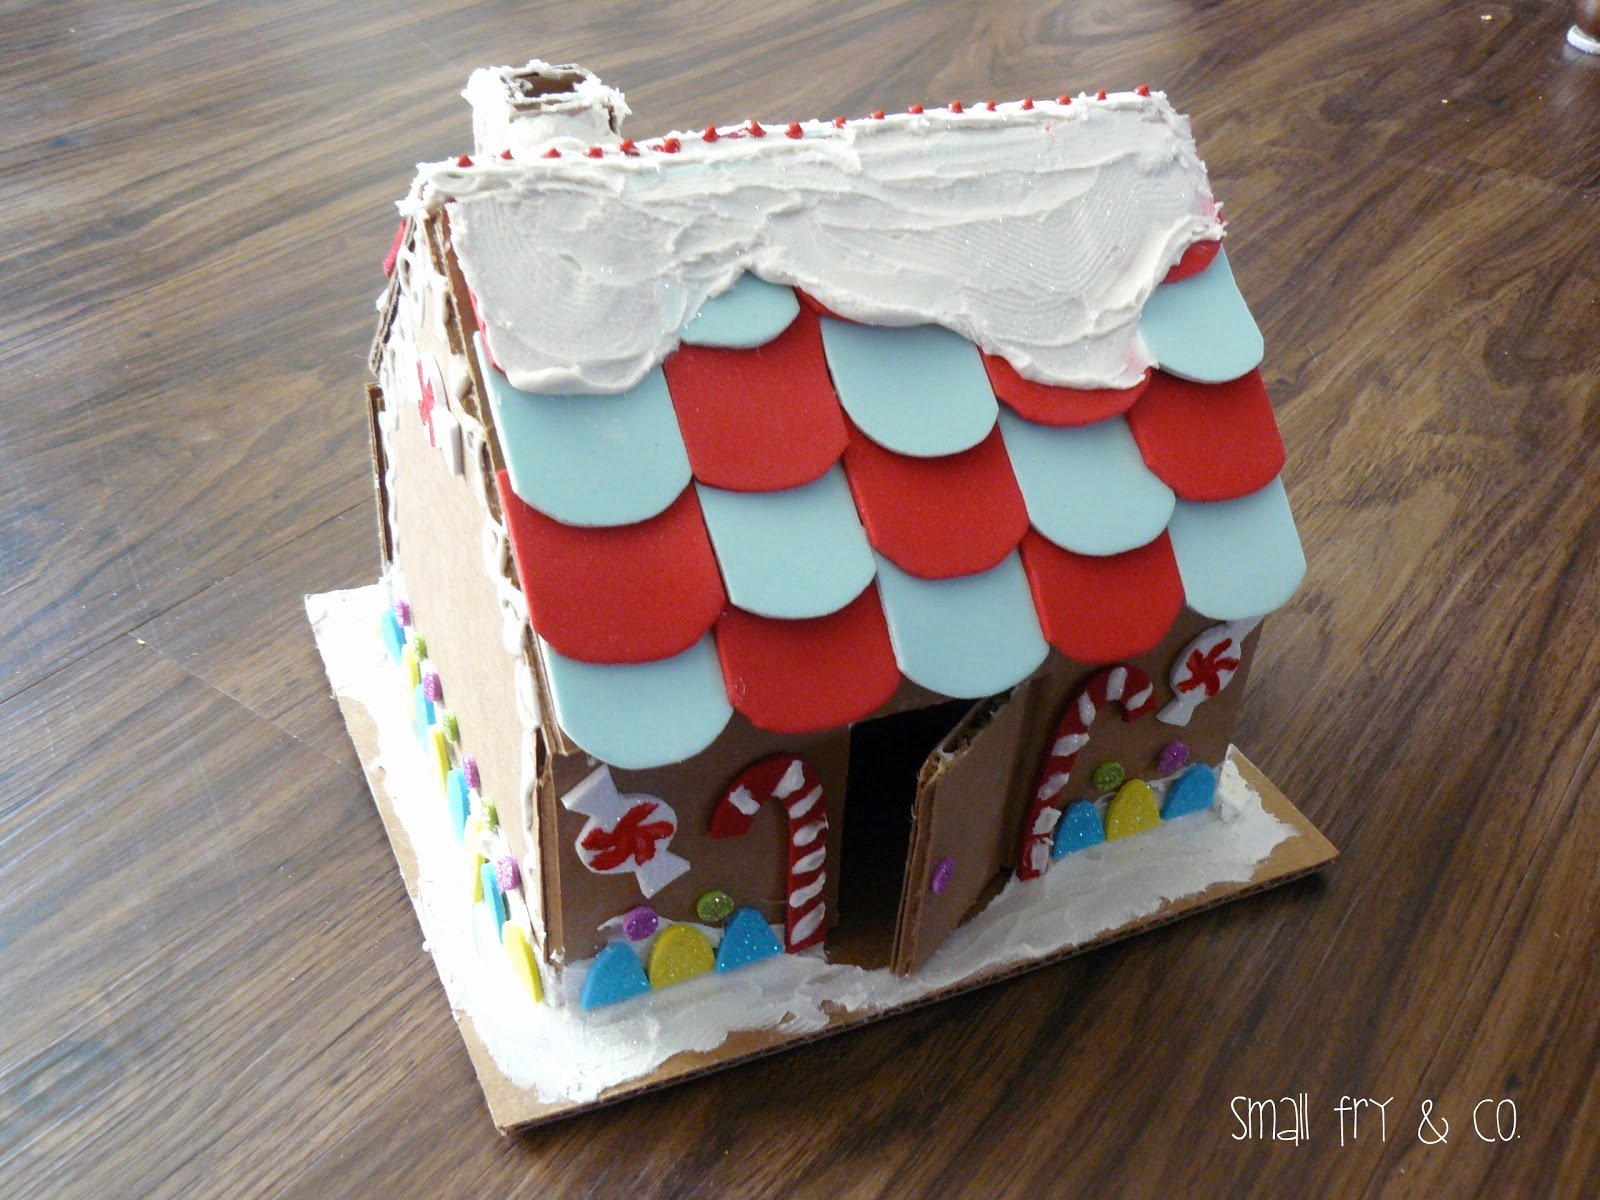 Cardboard Gingerbread House Elegant Small Fry &amp; Co A Gingerbread House that Could Last the